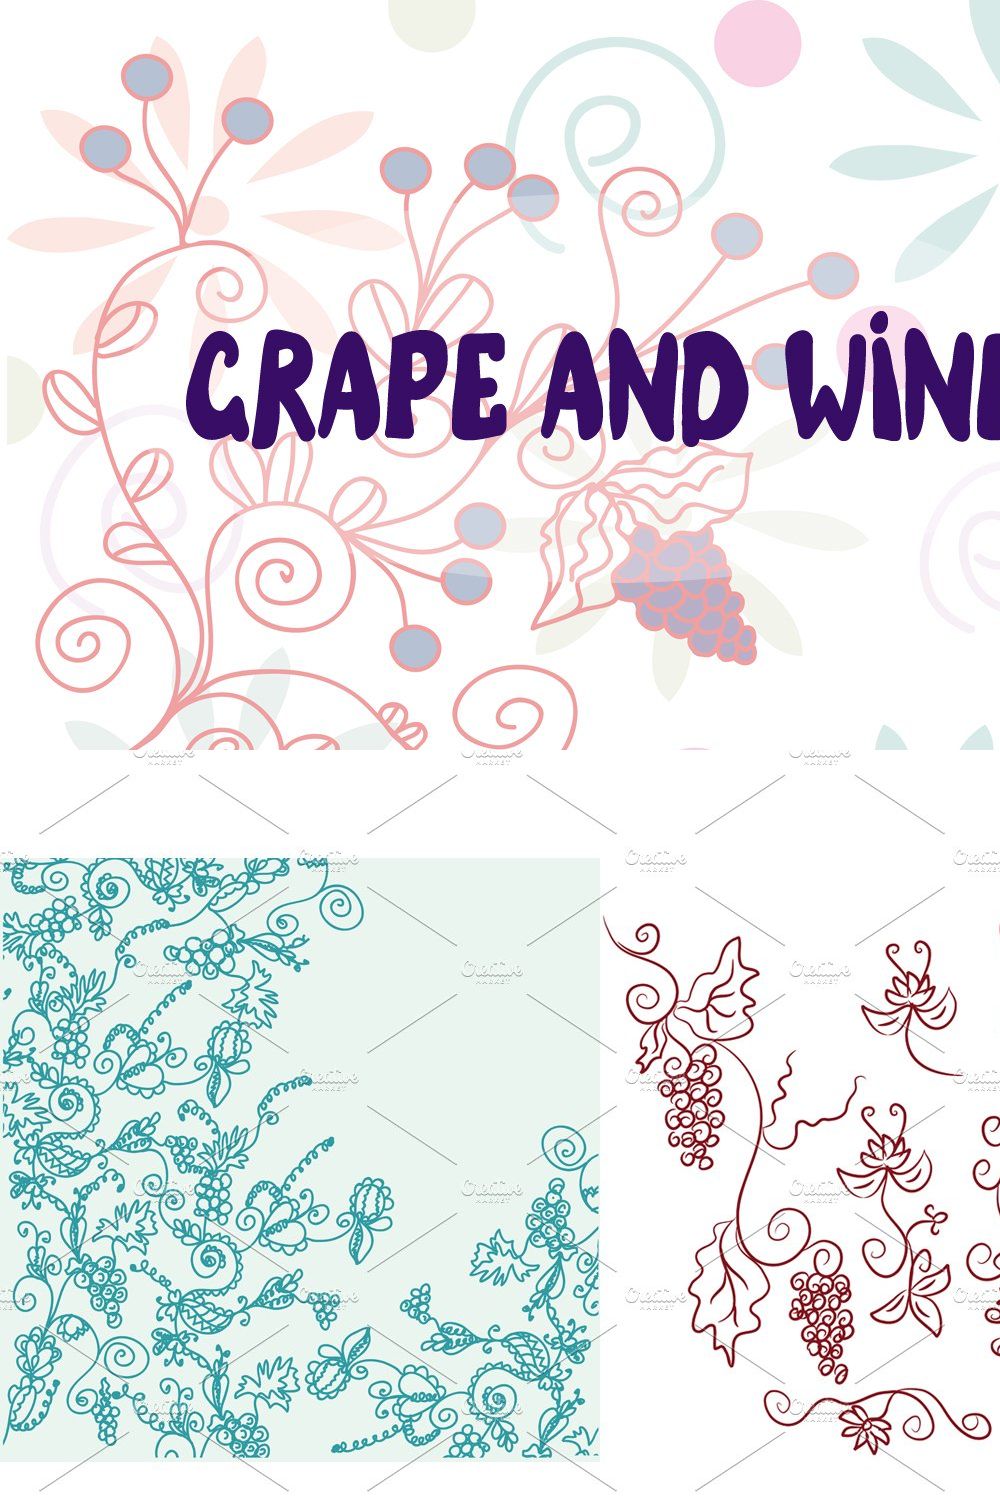 Grape and wine illustrations vectors pinterest preview image.